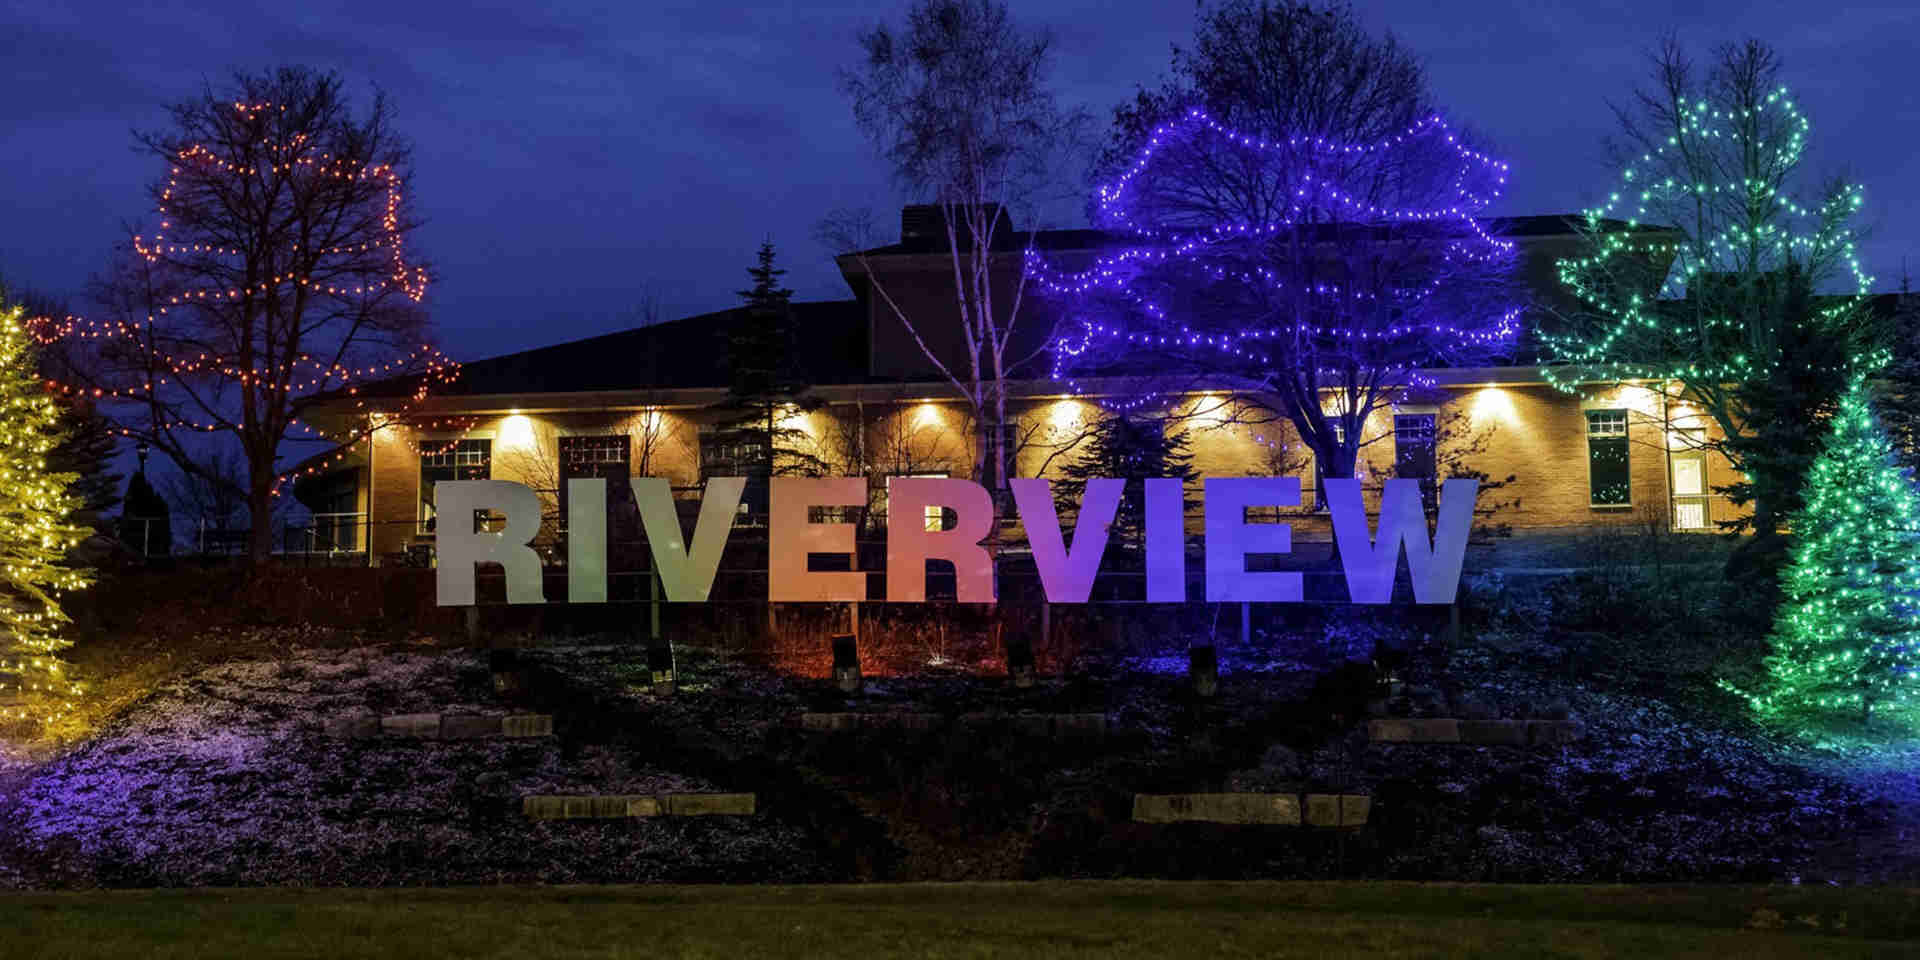 Should Retirees Rent Or Own? - Riverview-sign-lit-up